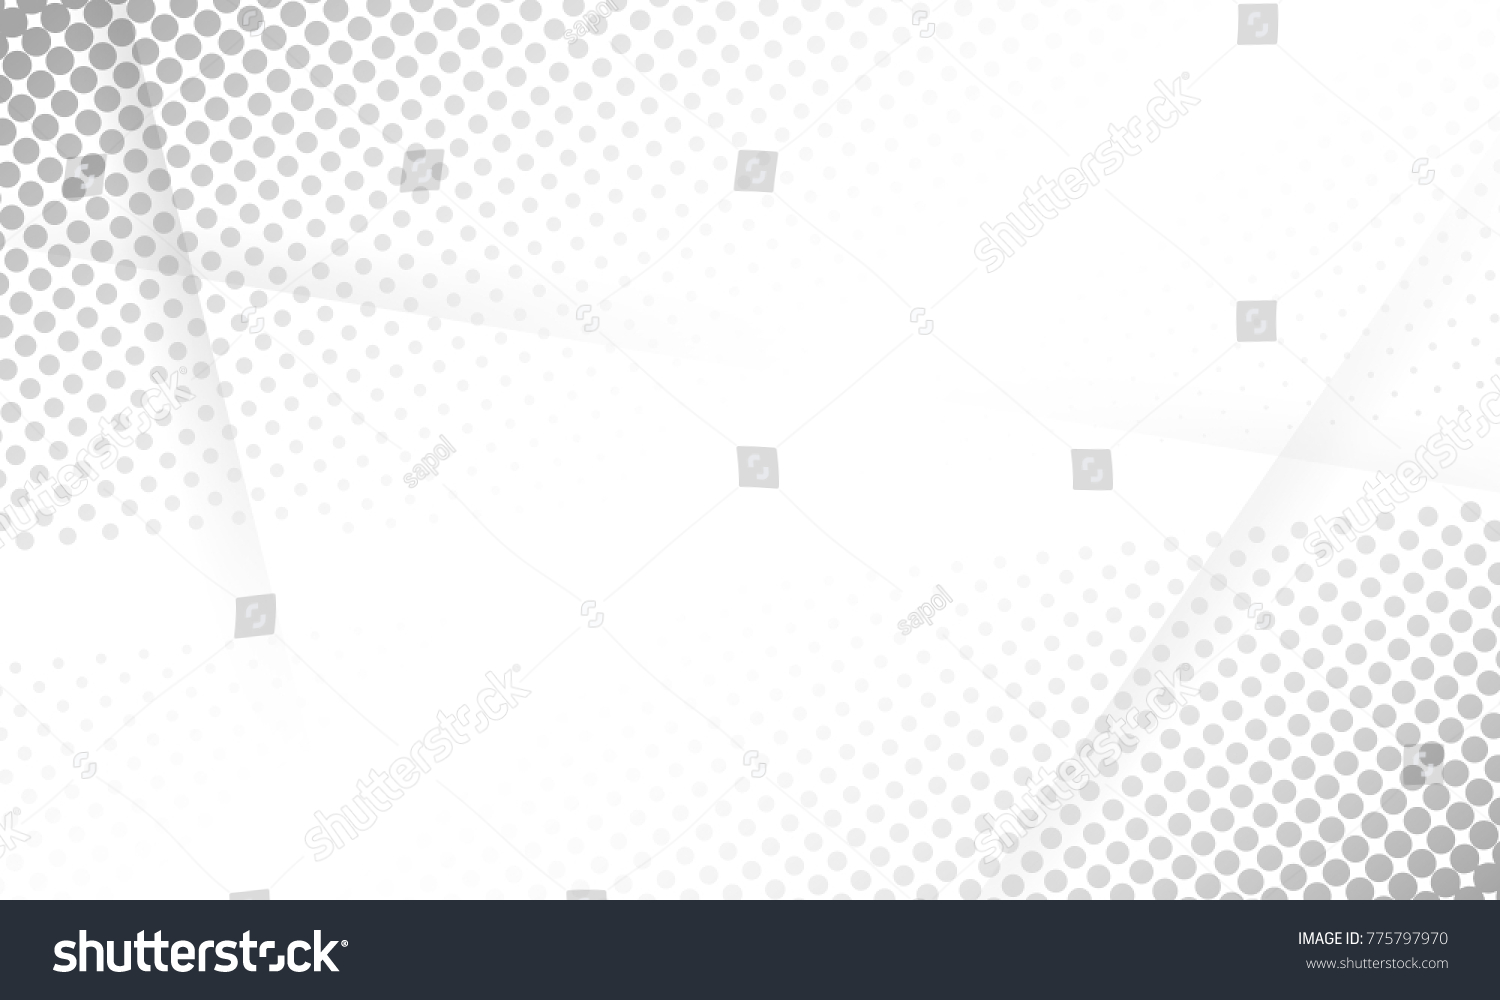 Halftone white & grey background. vector design concept. Decorative web layout or poster, banner. #775797970